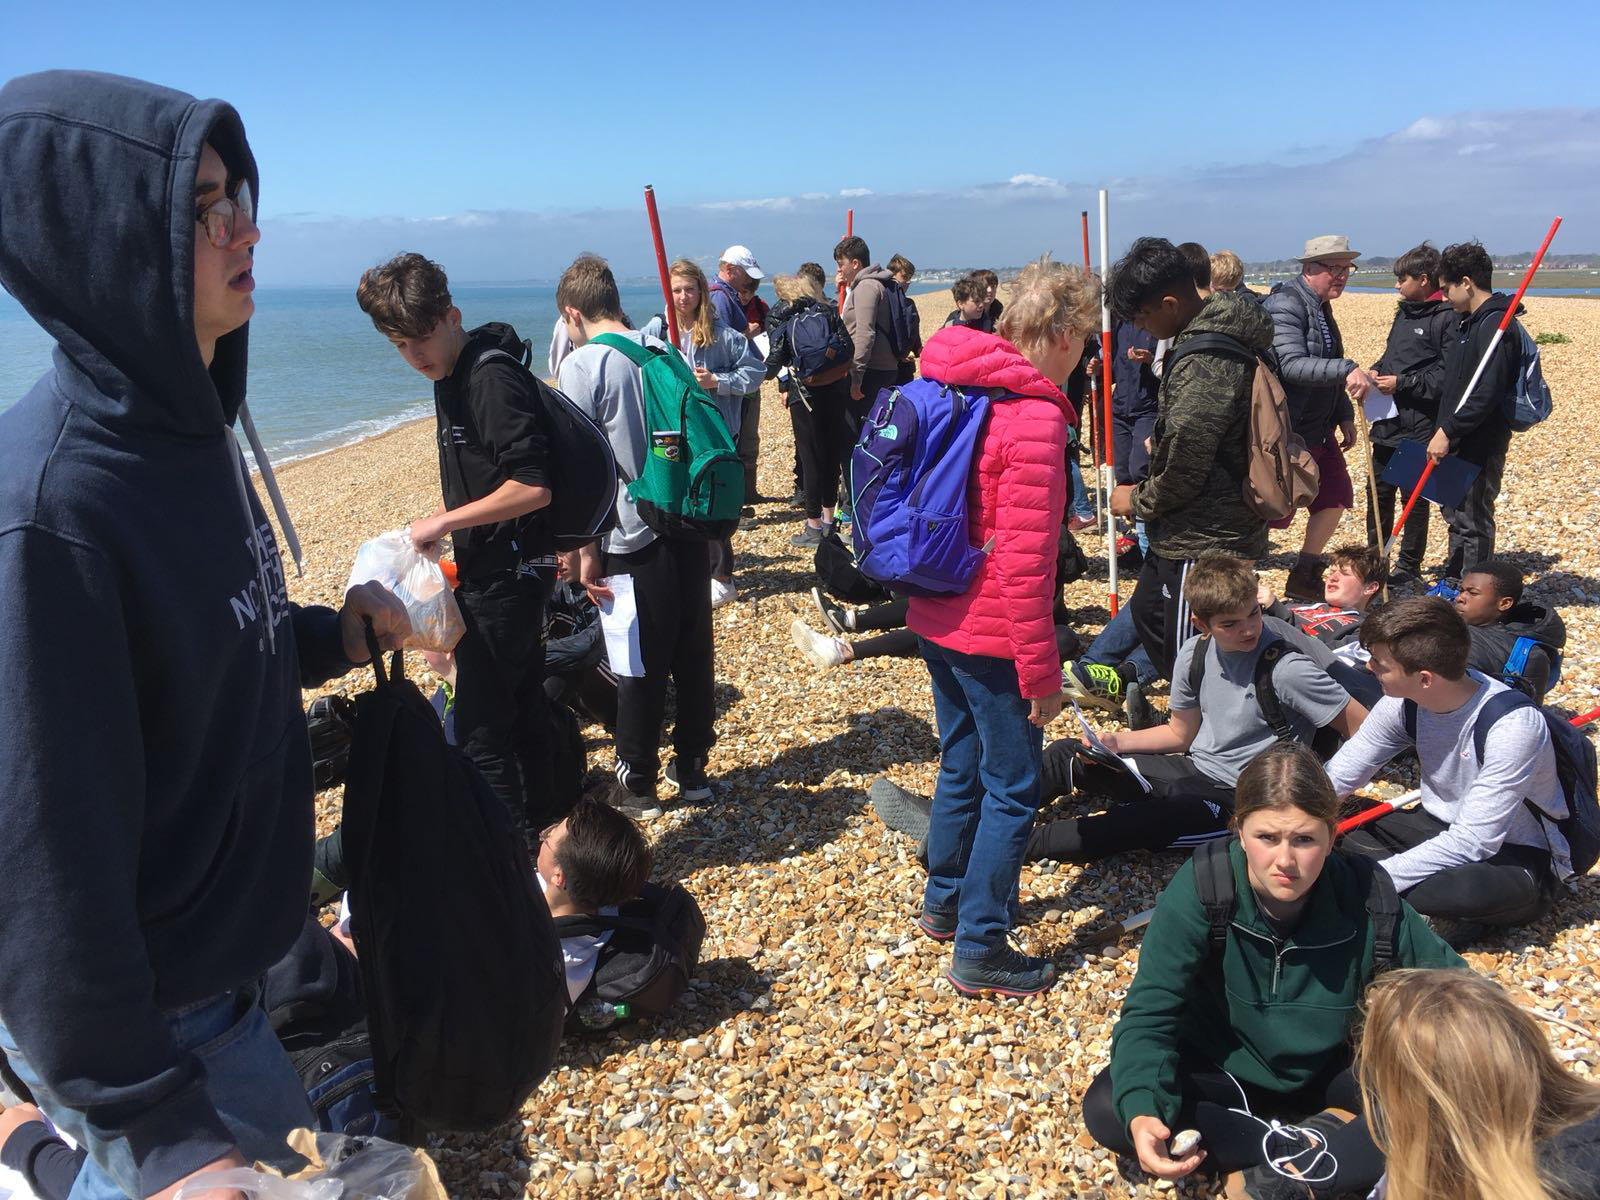 St Benedict's Geography students travel from Ealing to Hampshire coast